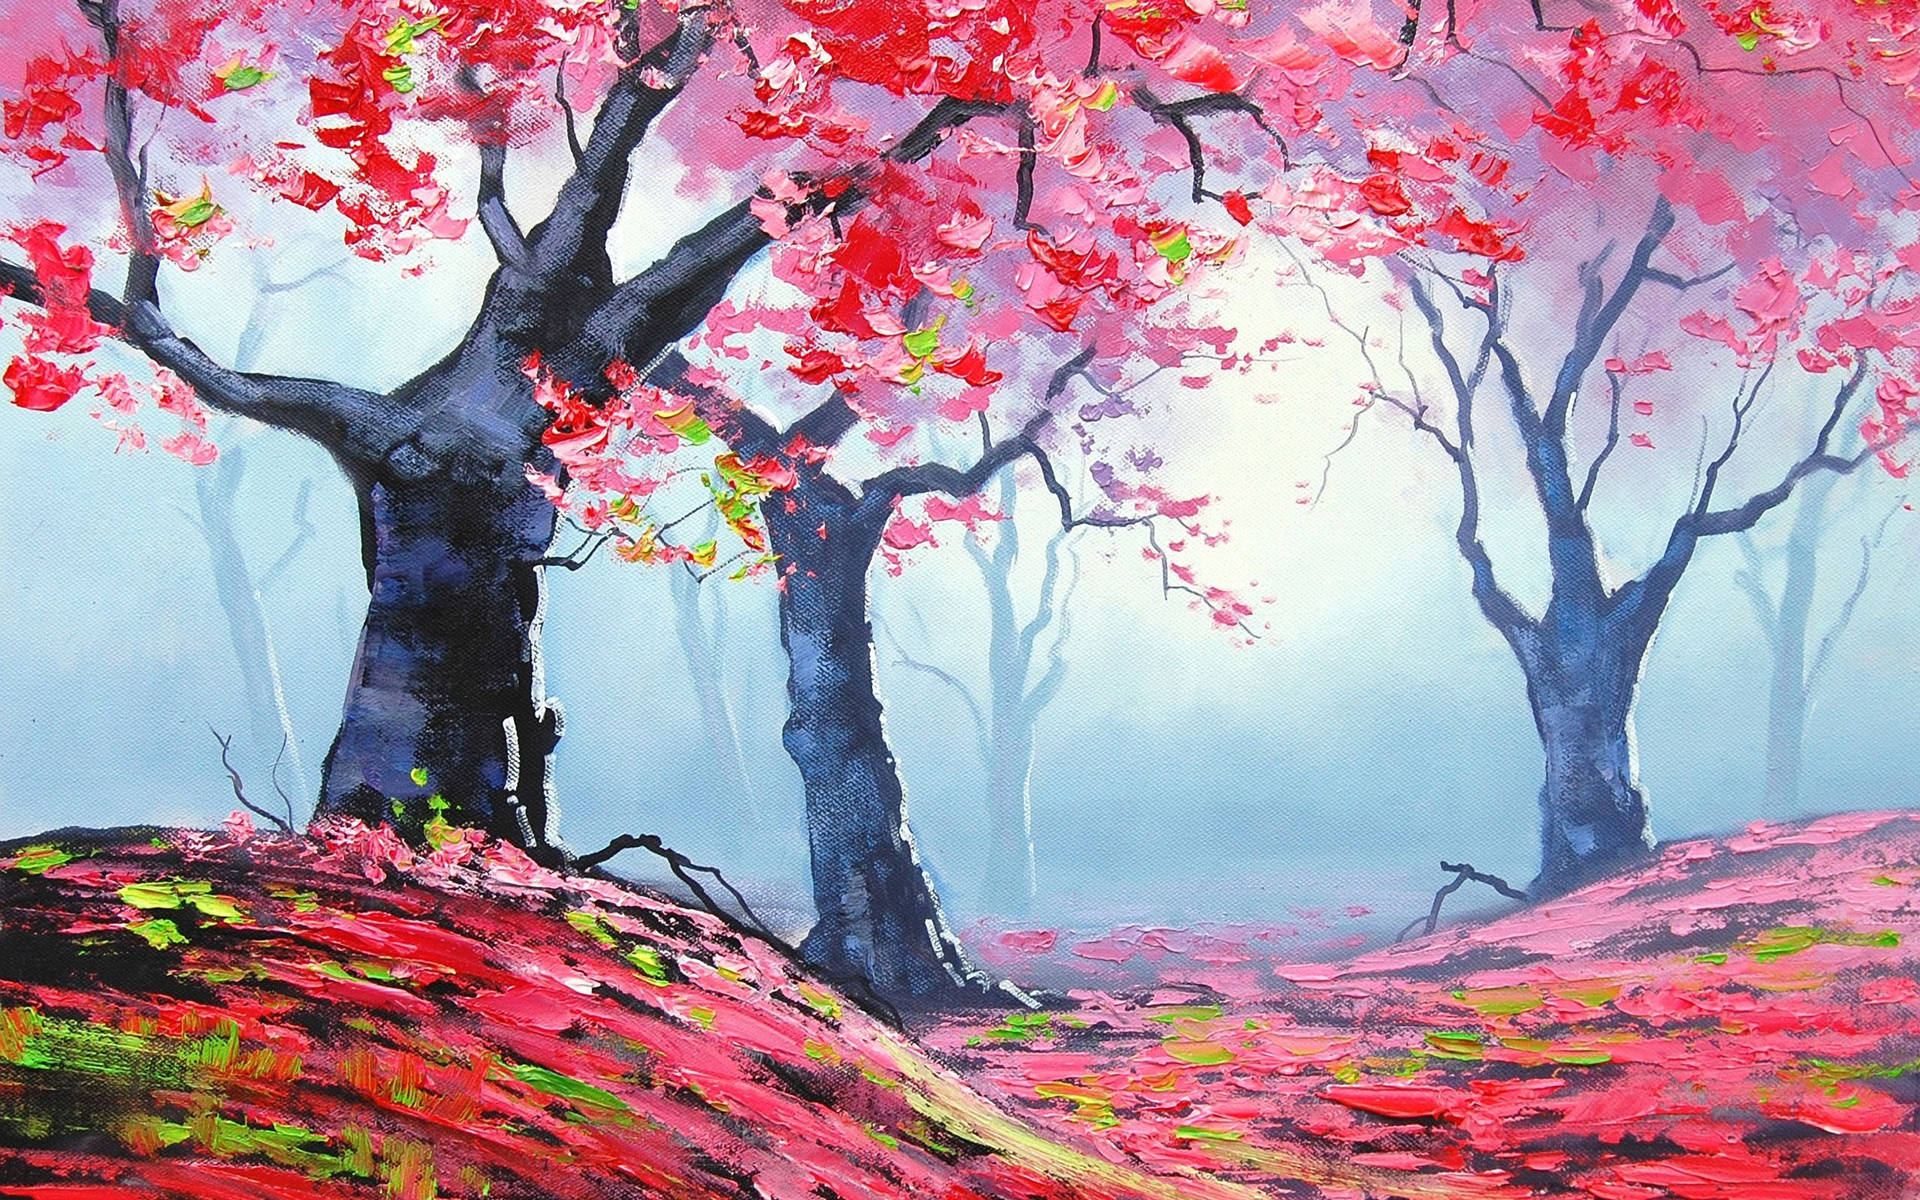 Tree art painting with pink leaves and flowers fallen on the ground.